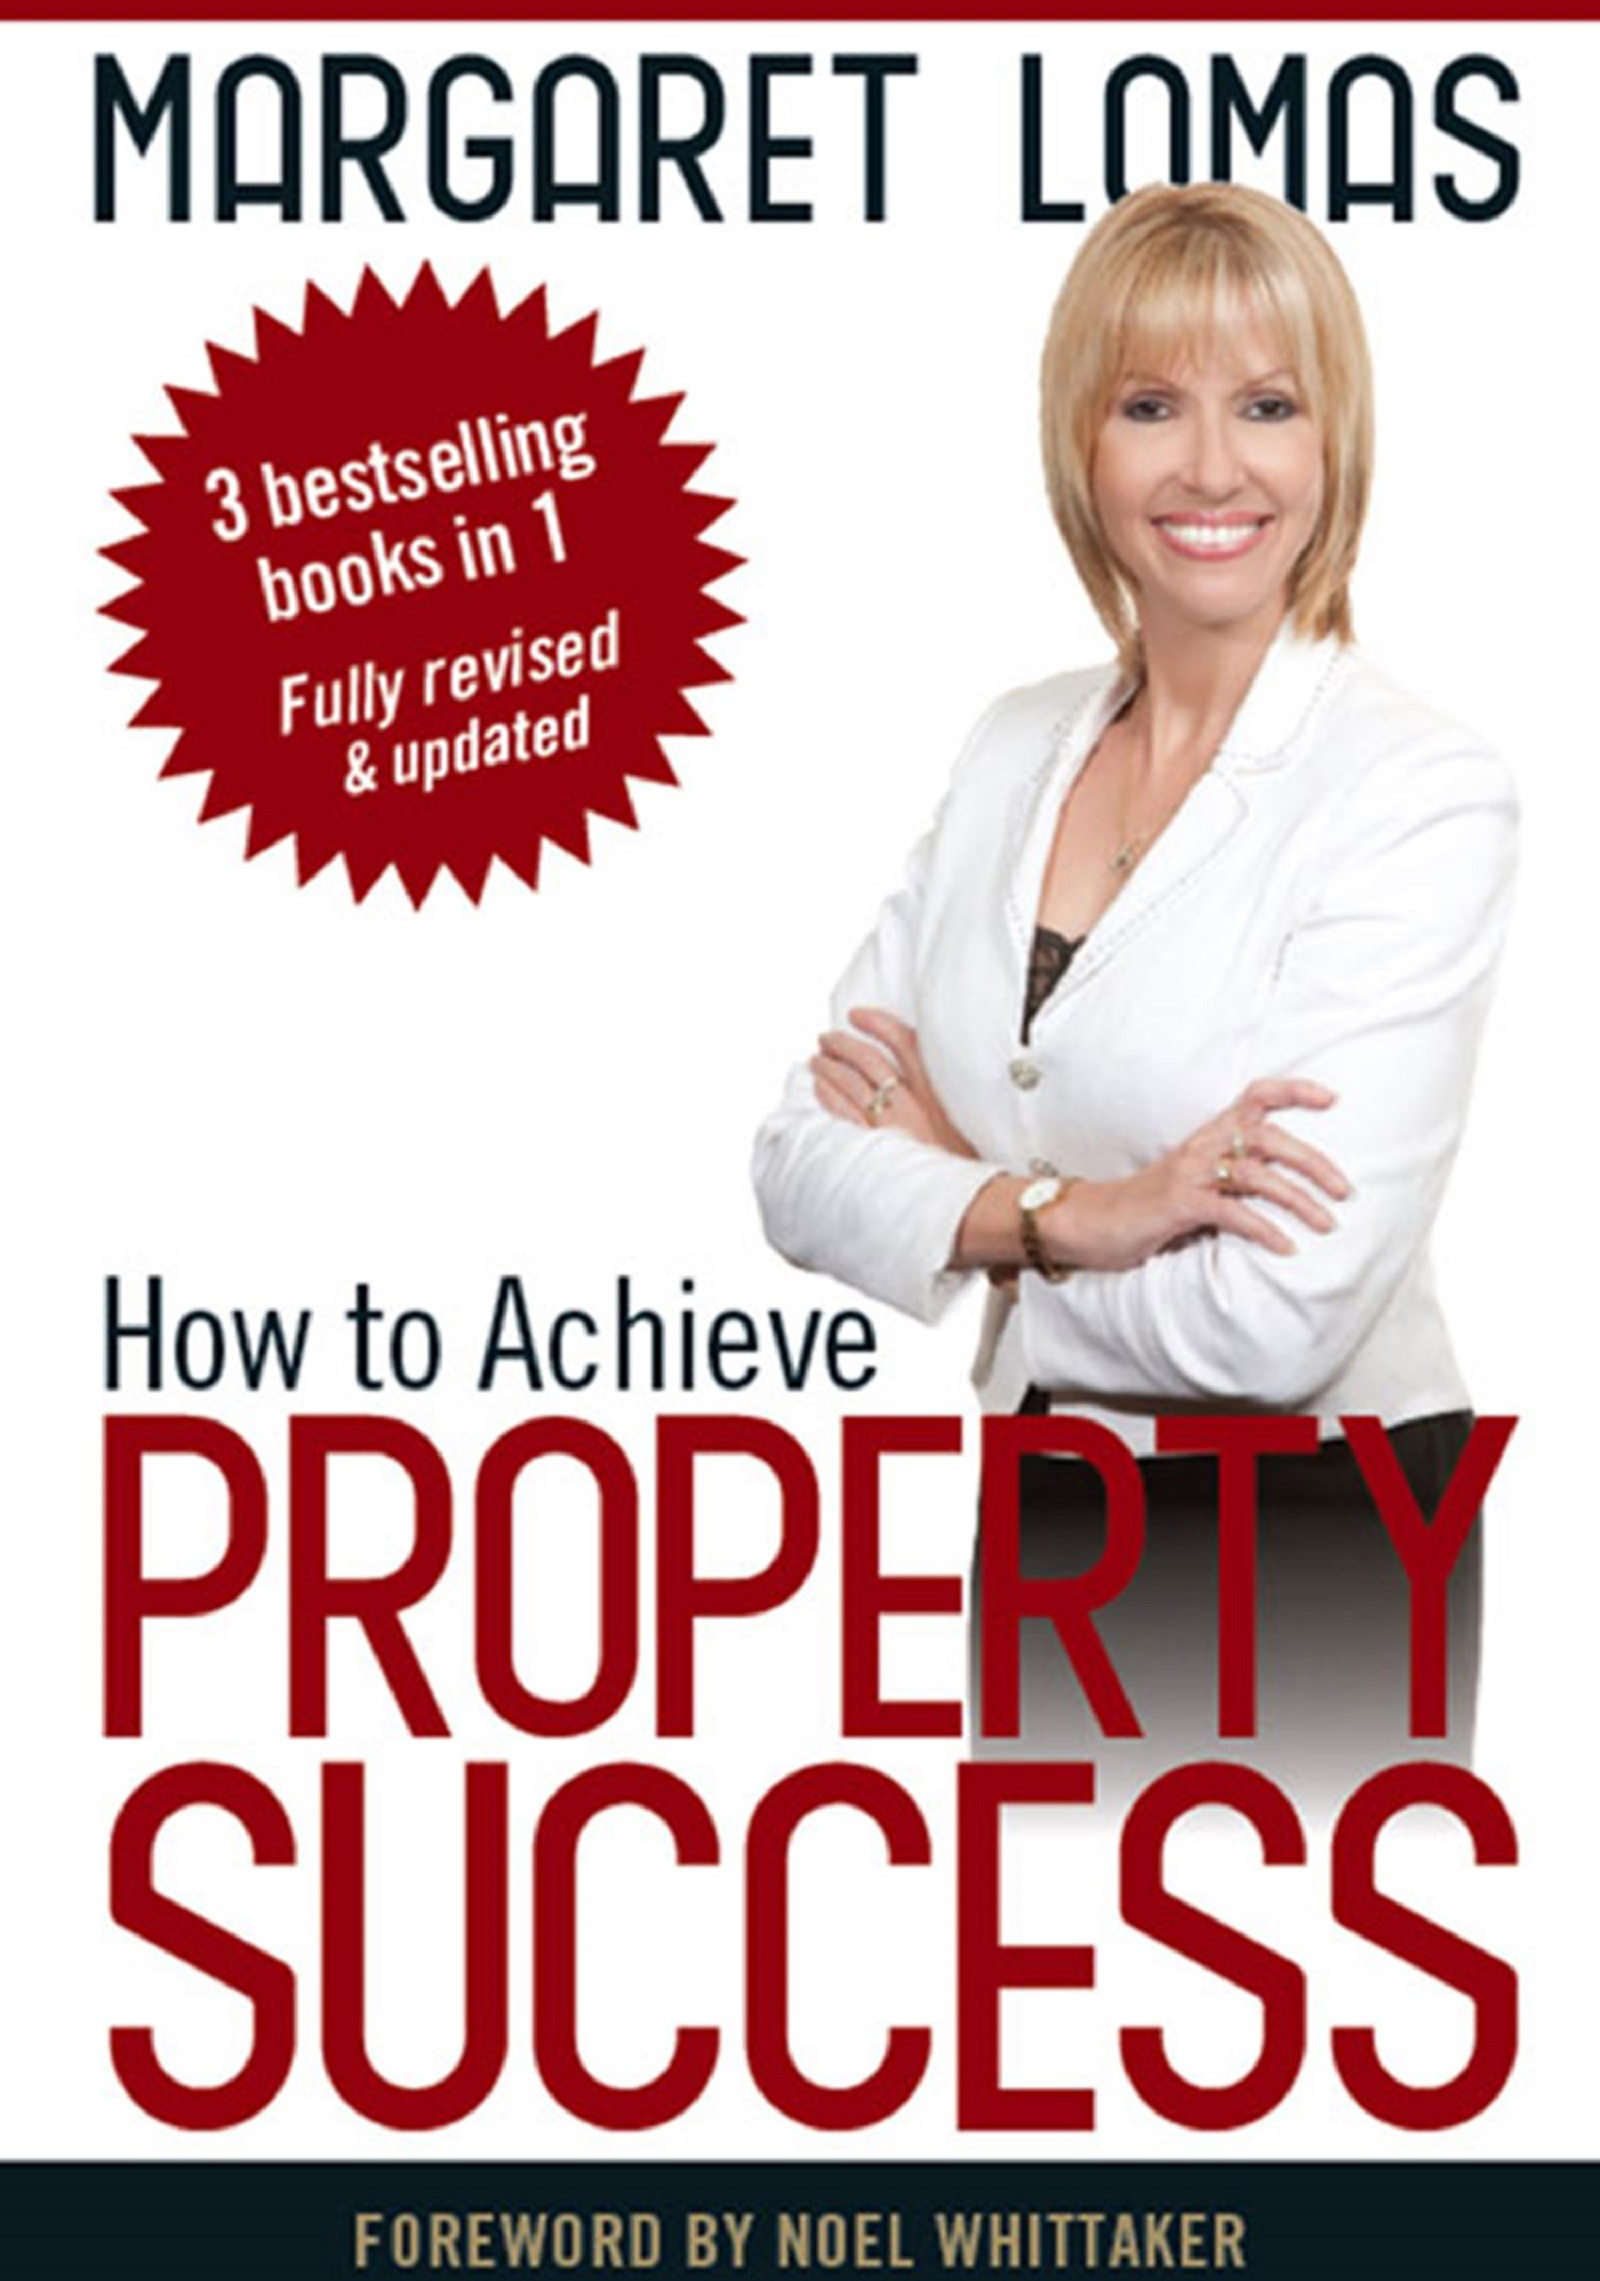 How to Achieve Property Success